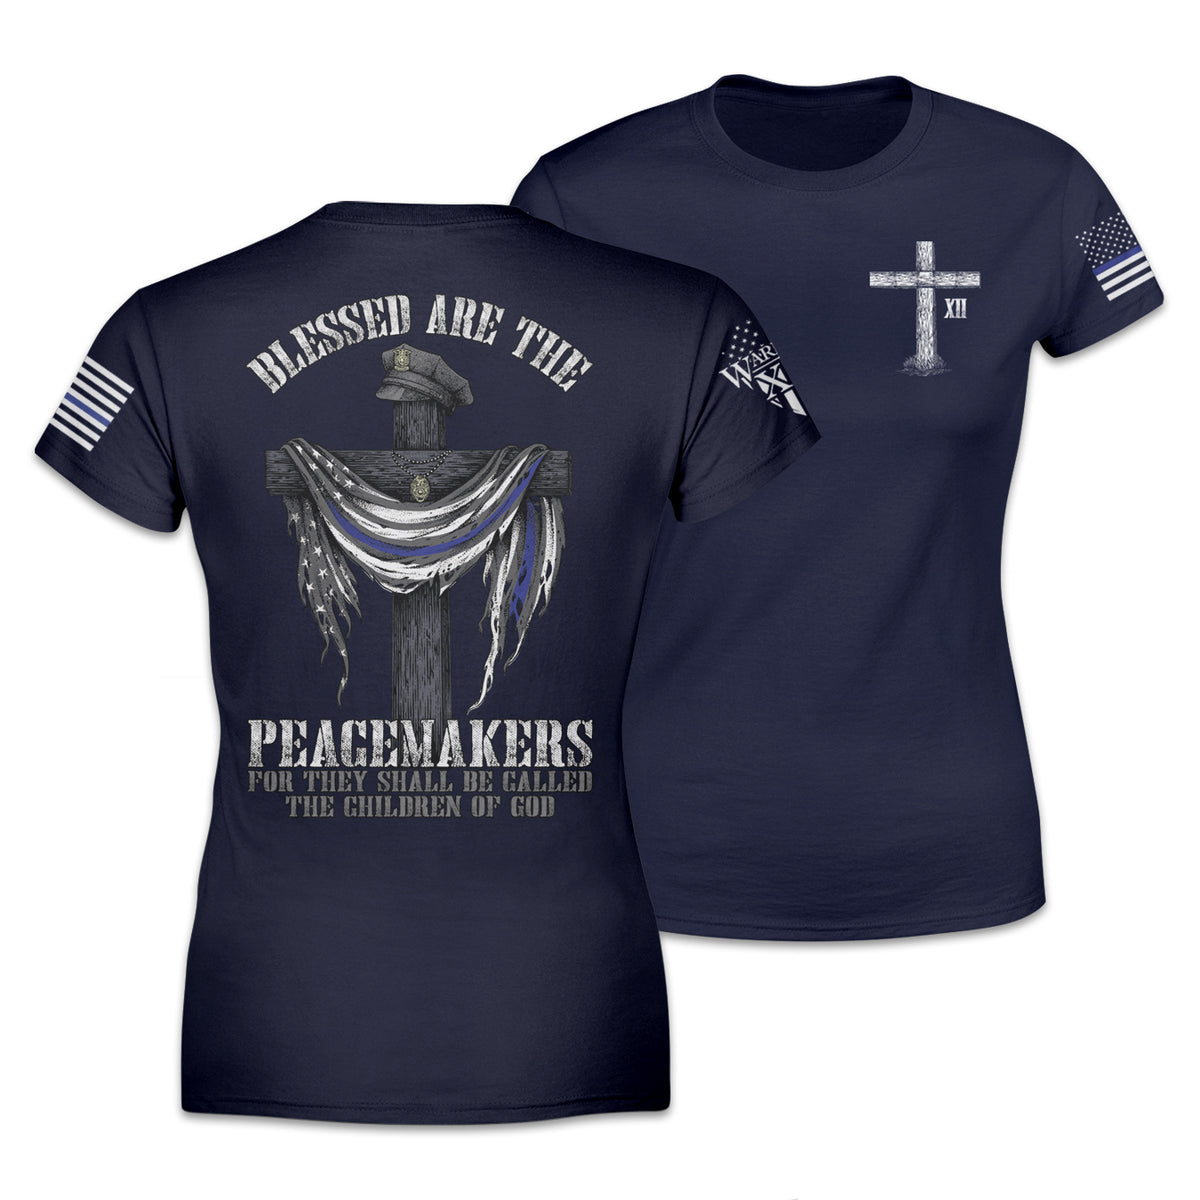 Women's Front & back blue Blessed Are The Peacemakers t-shirt with the cross, a police hat, and the back the blue flag printed on the shirt.